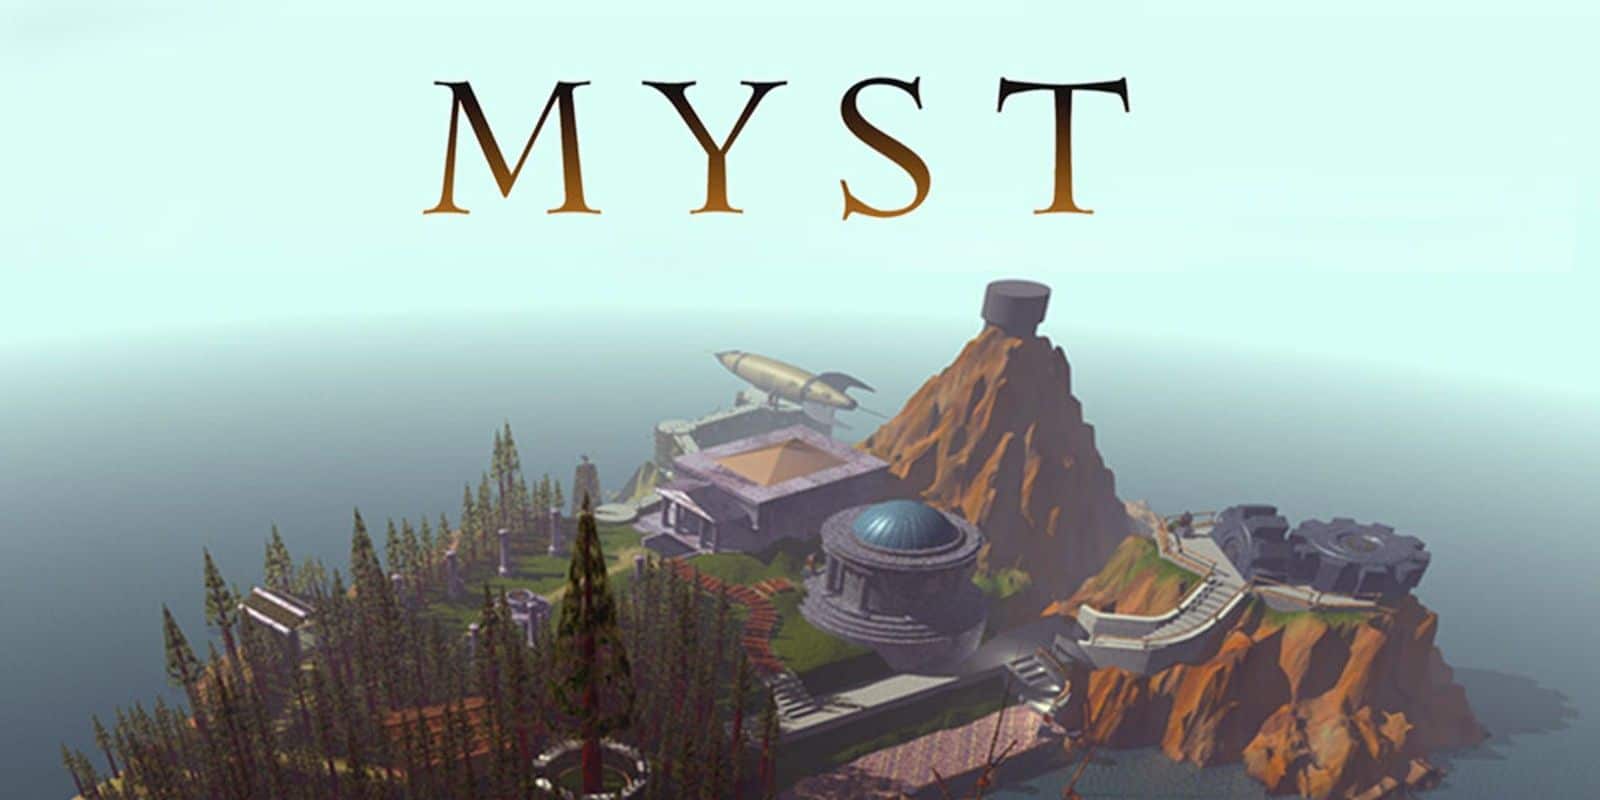 Myst remake coming to Xbox and PC this August